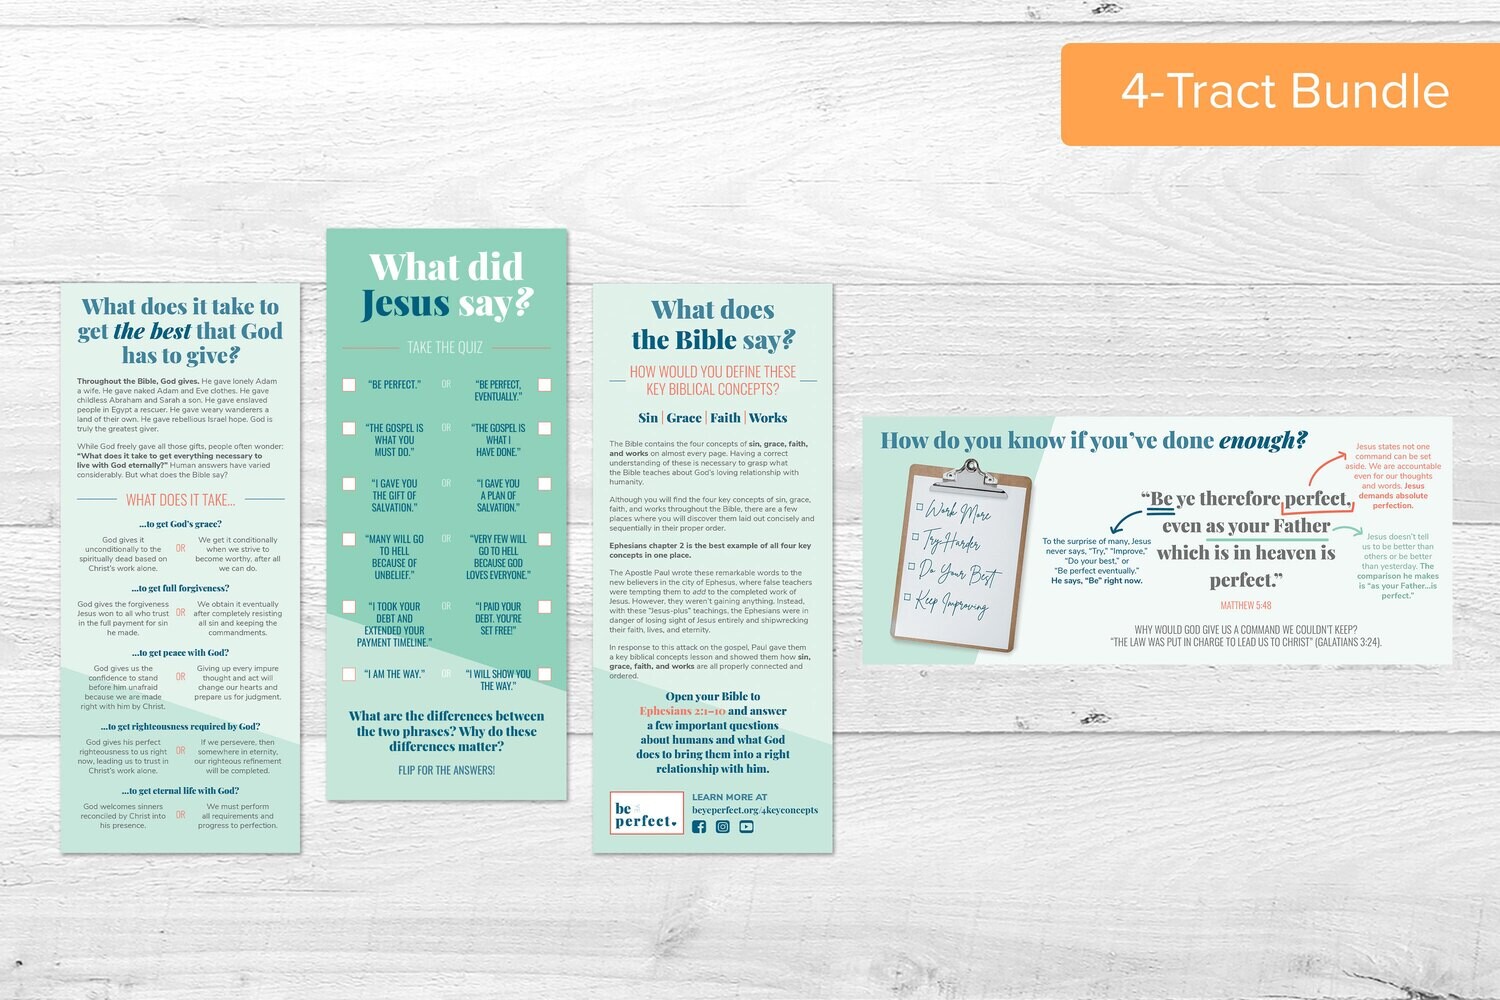 Tract Bundle:  All 4 Tracts together